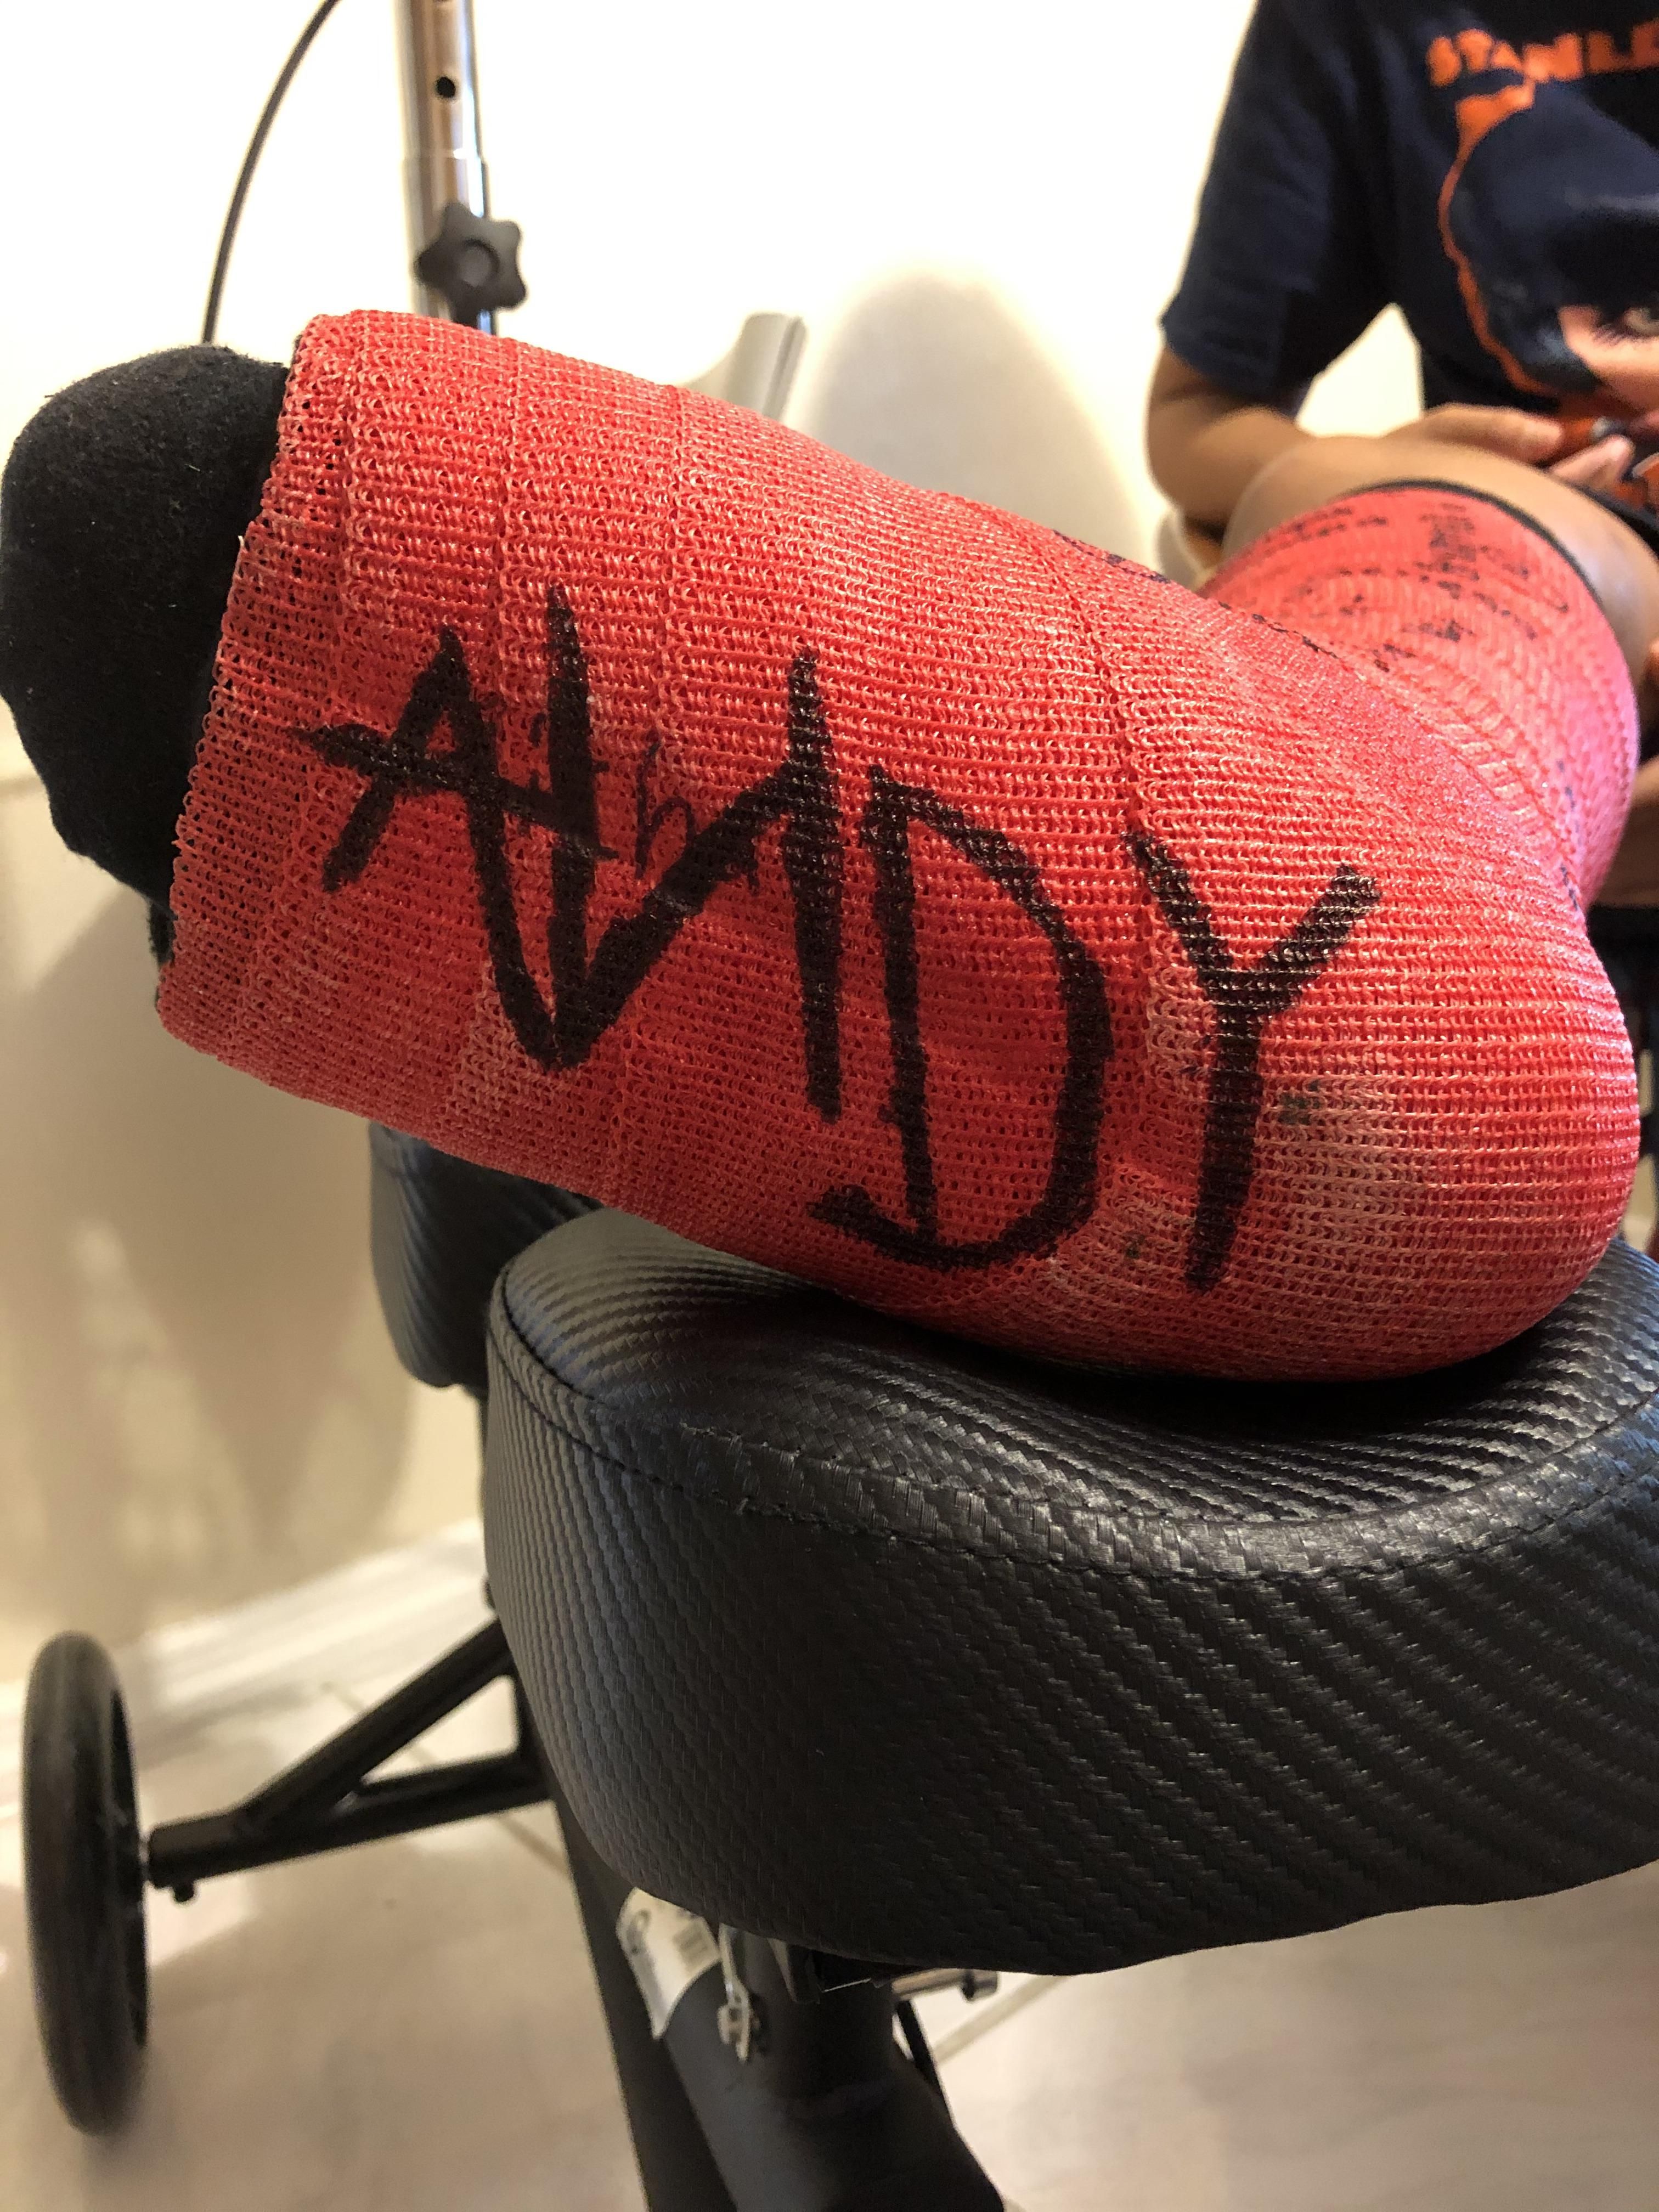 My niece asked me to draw something on her cast, and I couldn't resist...